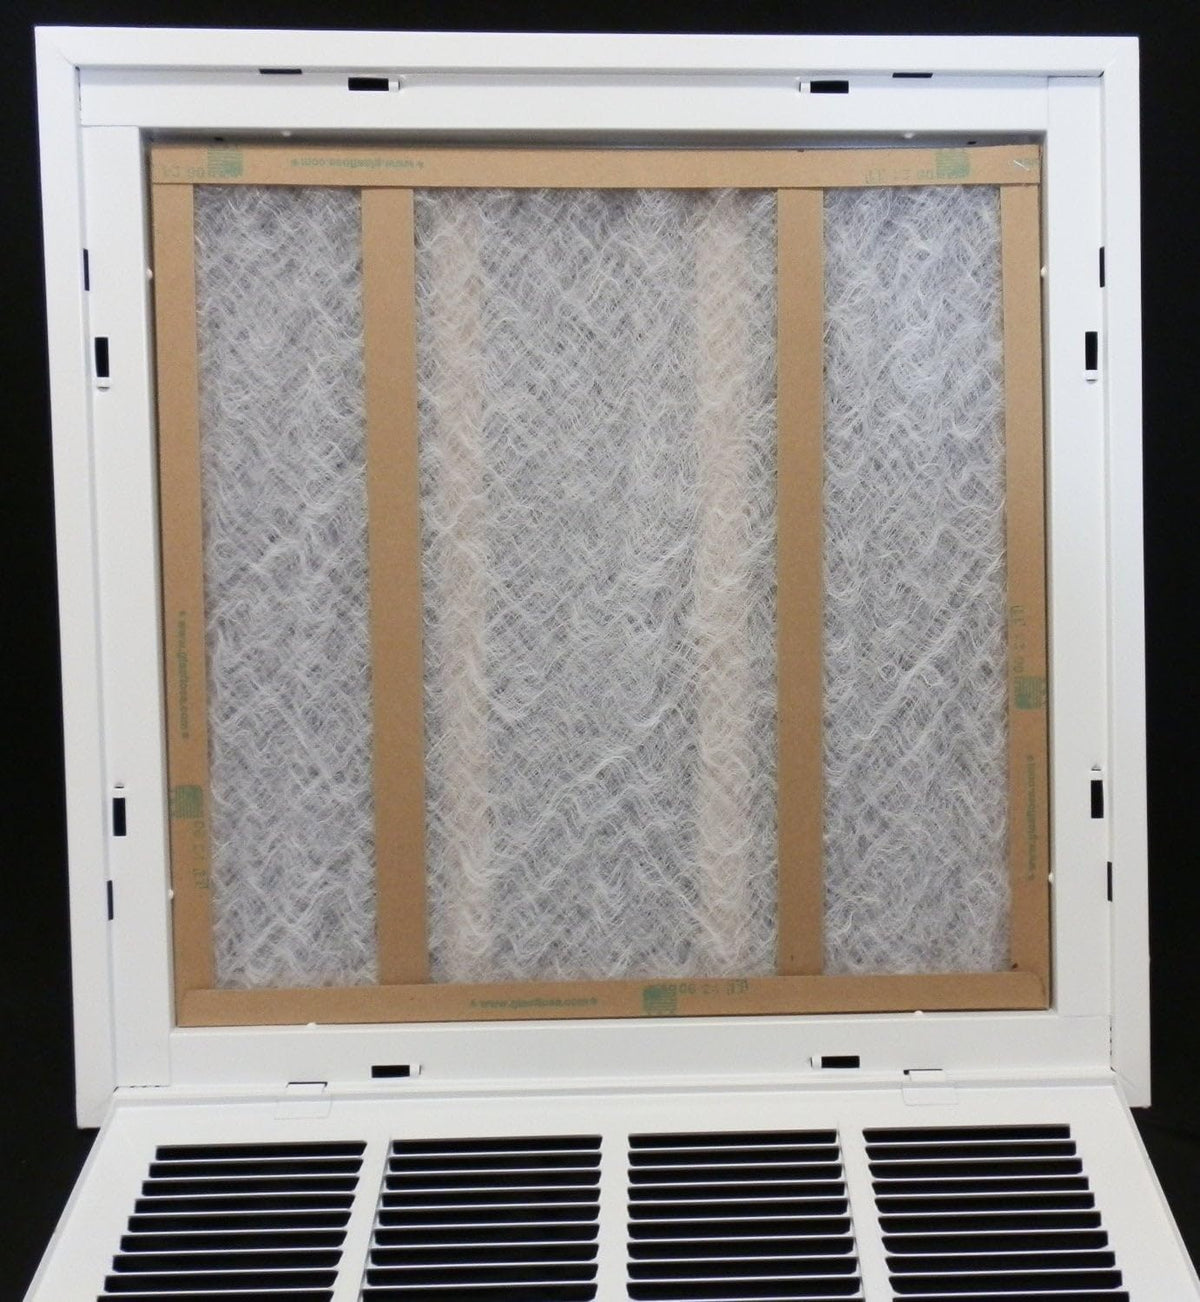 20&quot; X 34&quot; Steel Return Air Filter Grille for 1&quot; Filter - Removable Frame - [Outer Dimensions: 22 5/8&quot; X 36 5/8&quot;]